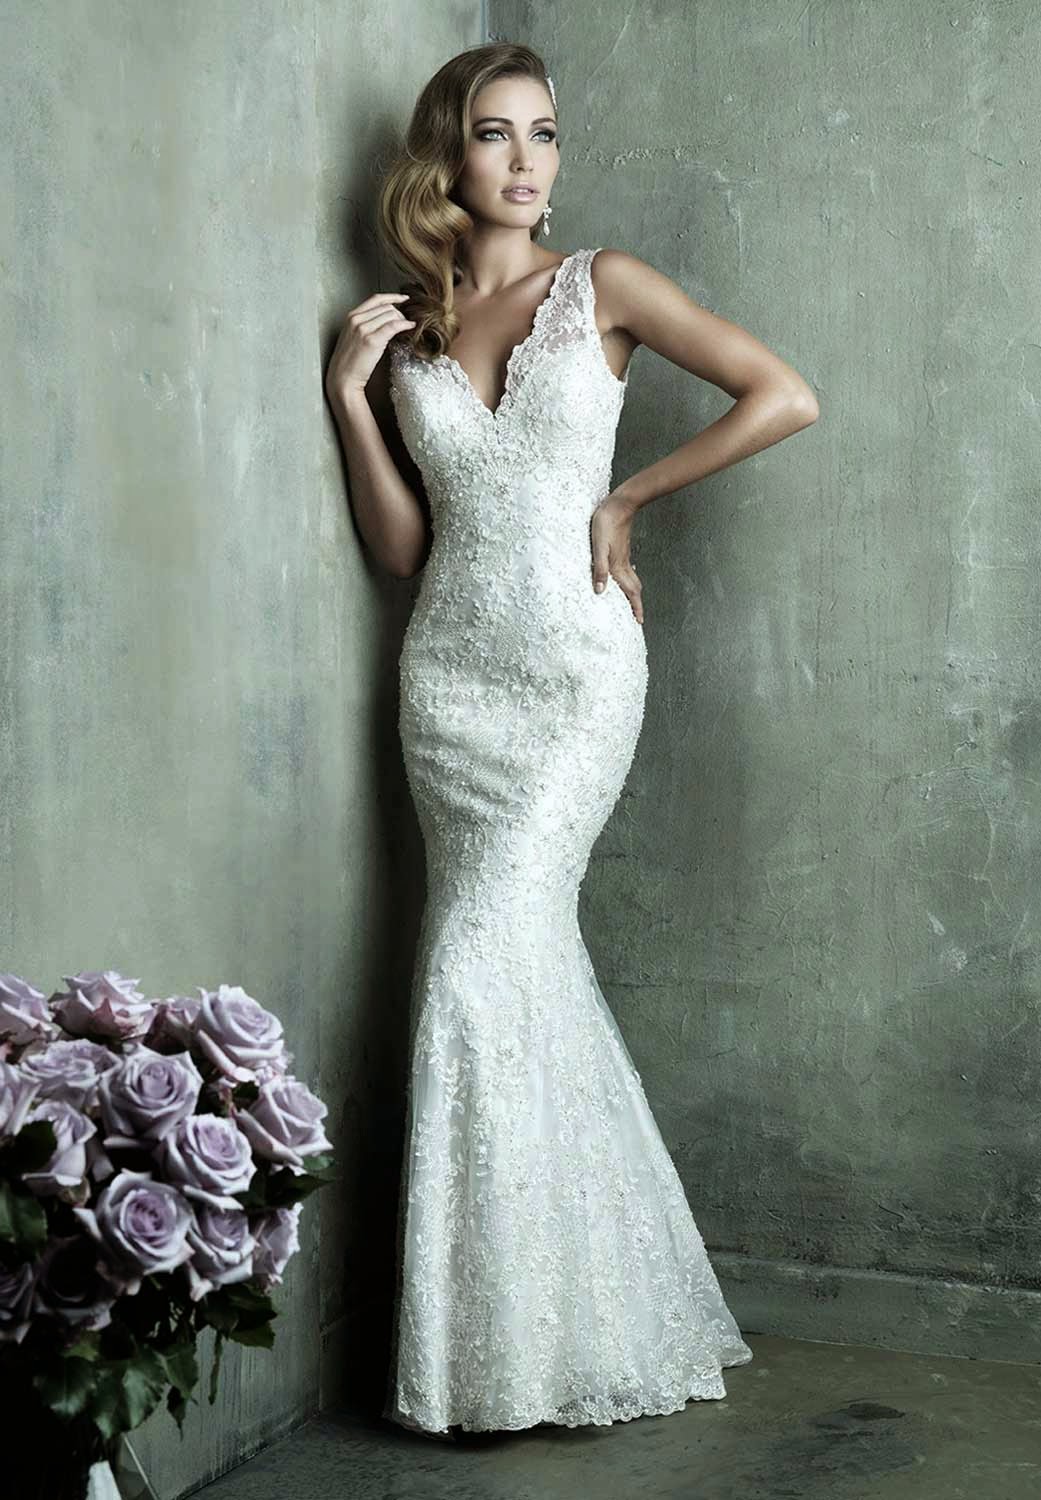 Amazing Vintage Designer Wedding Dresses of the decade The ultimate guide 